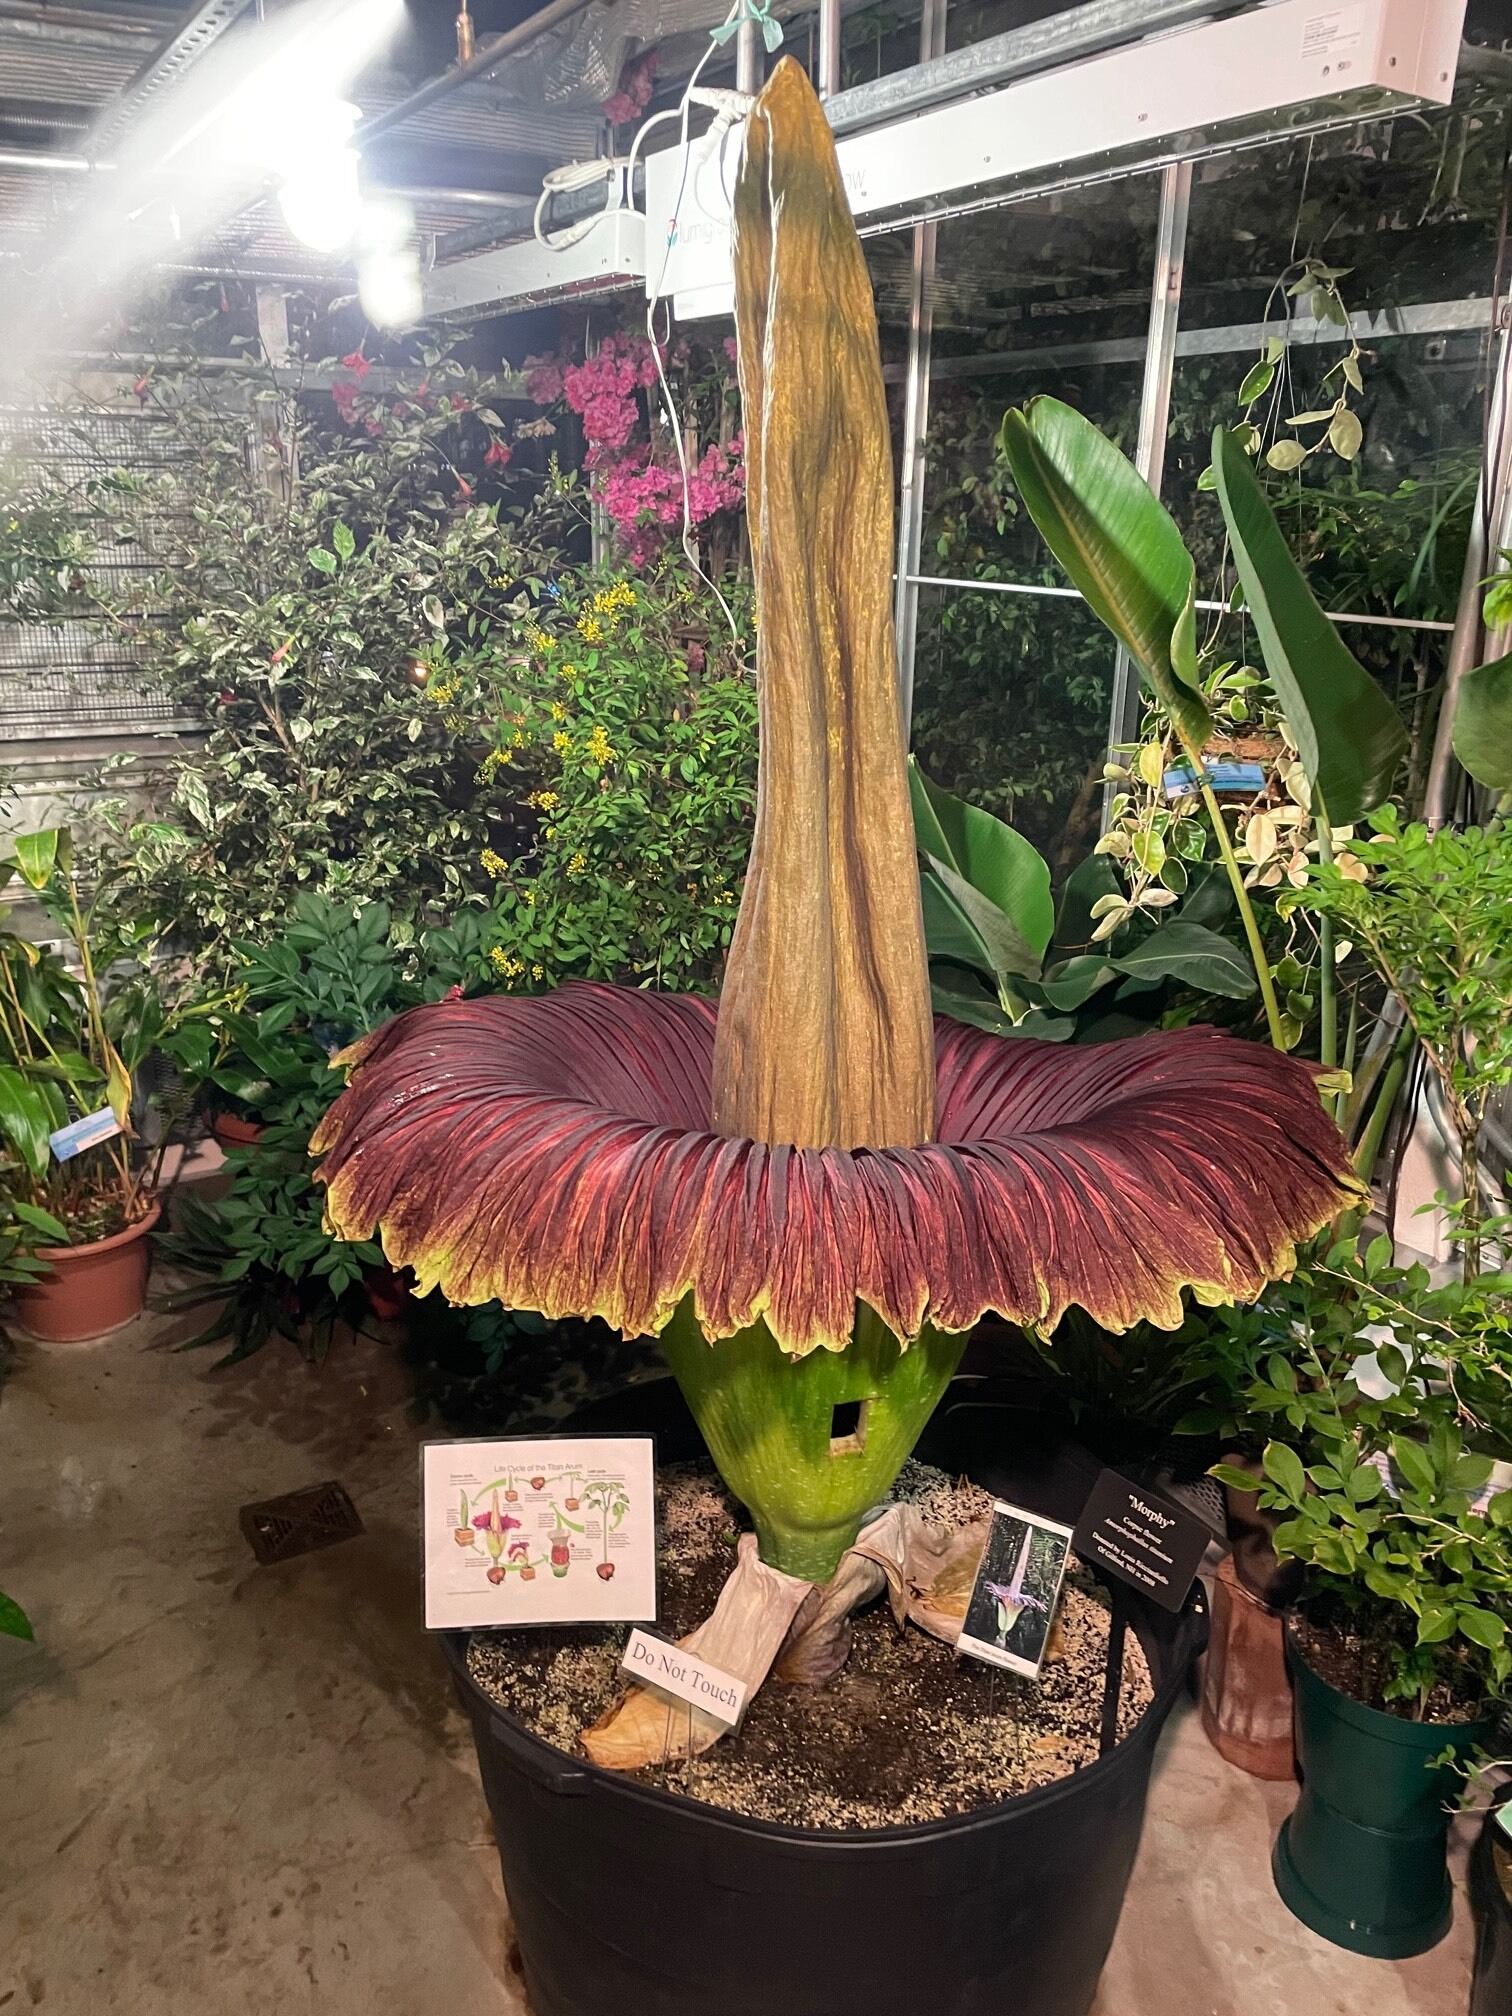 morphy" - the corpse flower